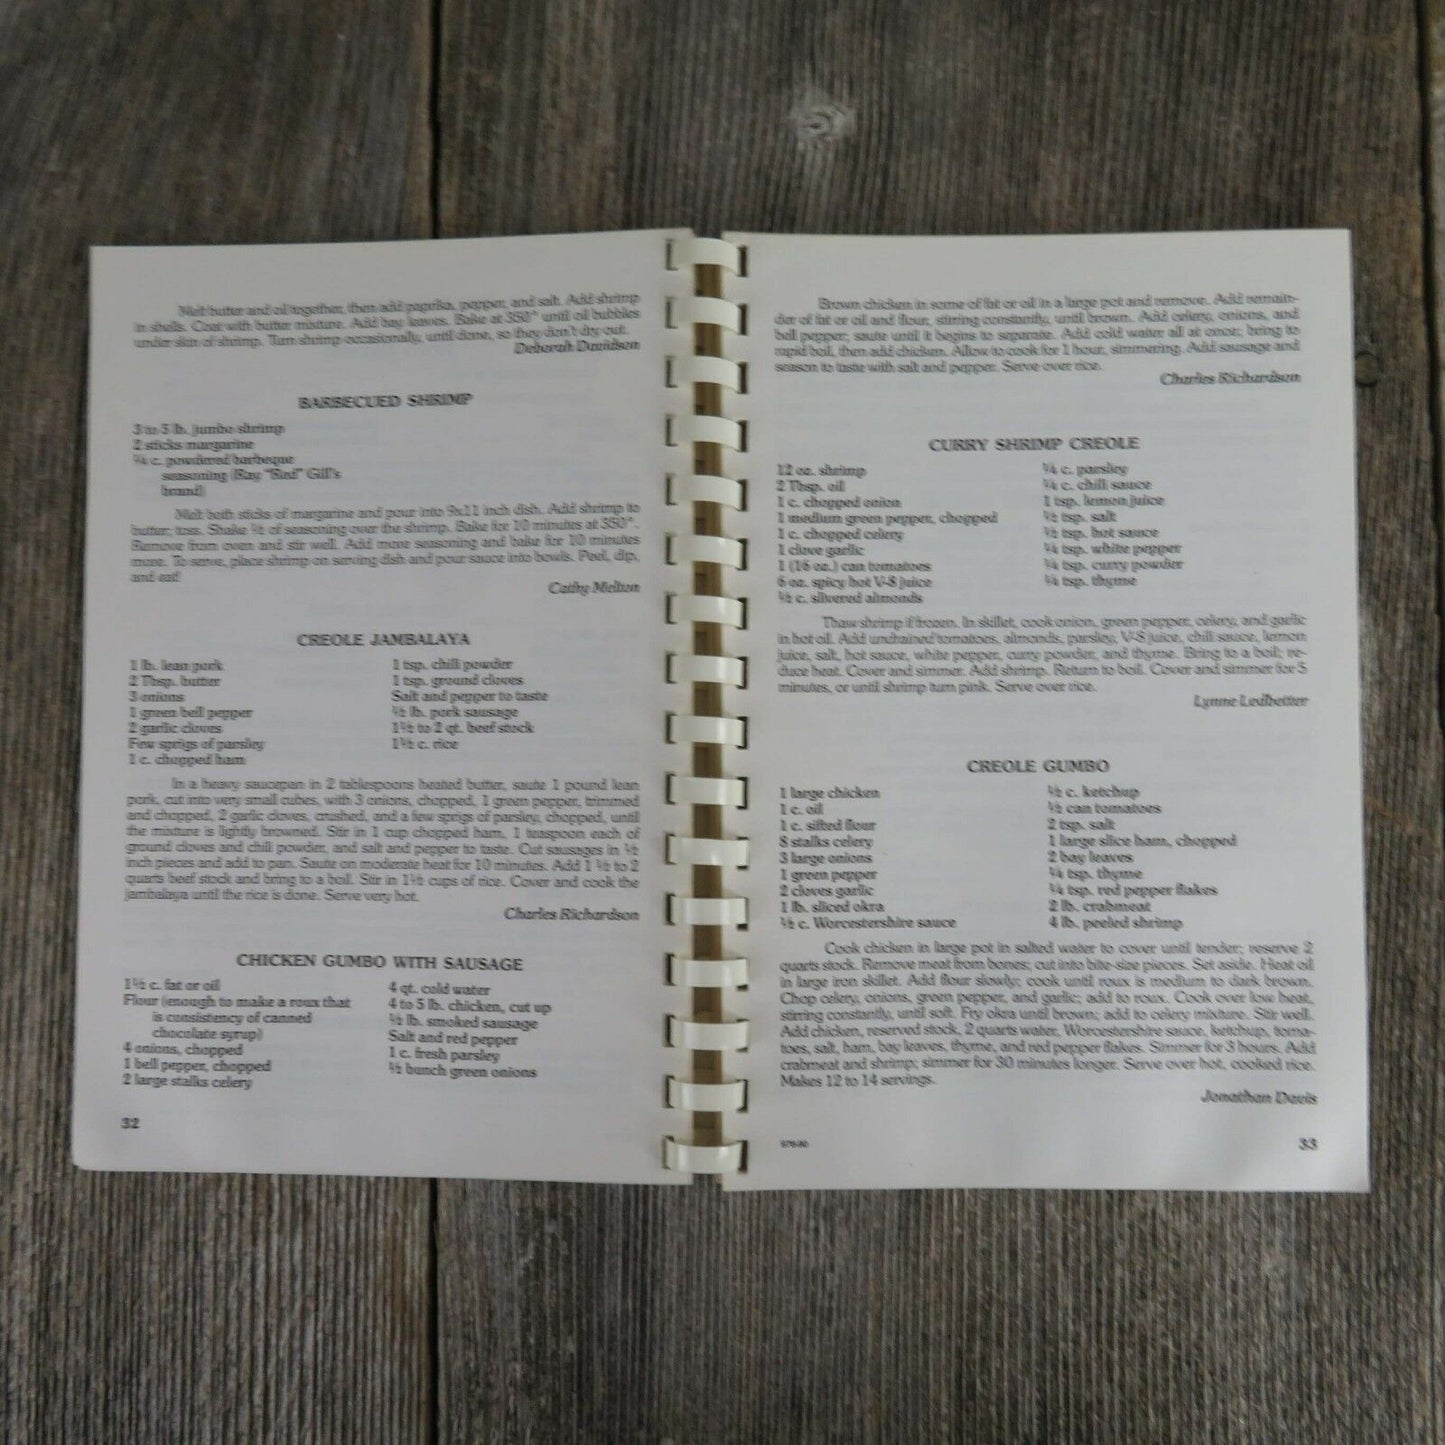 Vintage Tennessee Cookbook Alpha's Memphis Laboratory Sorority Southern Accent - At Grandma's Table